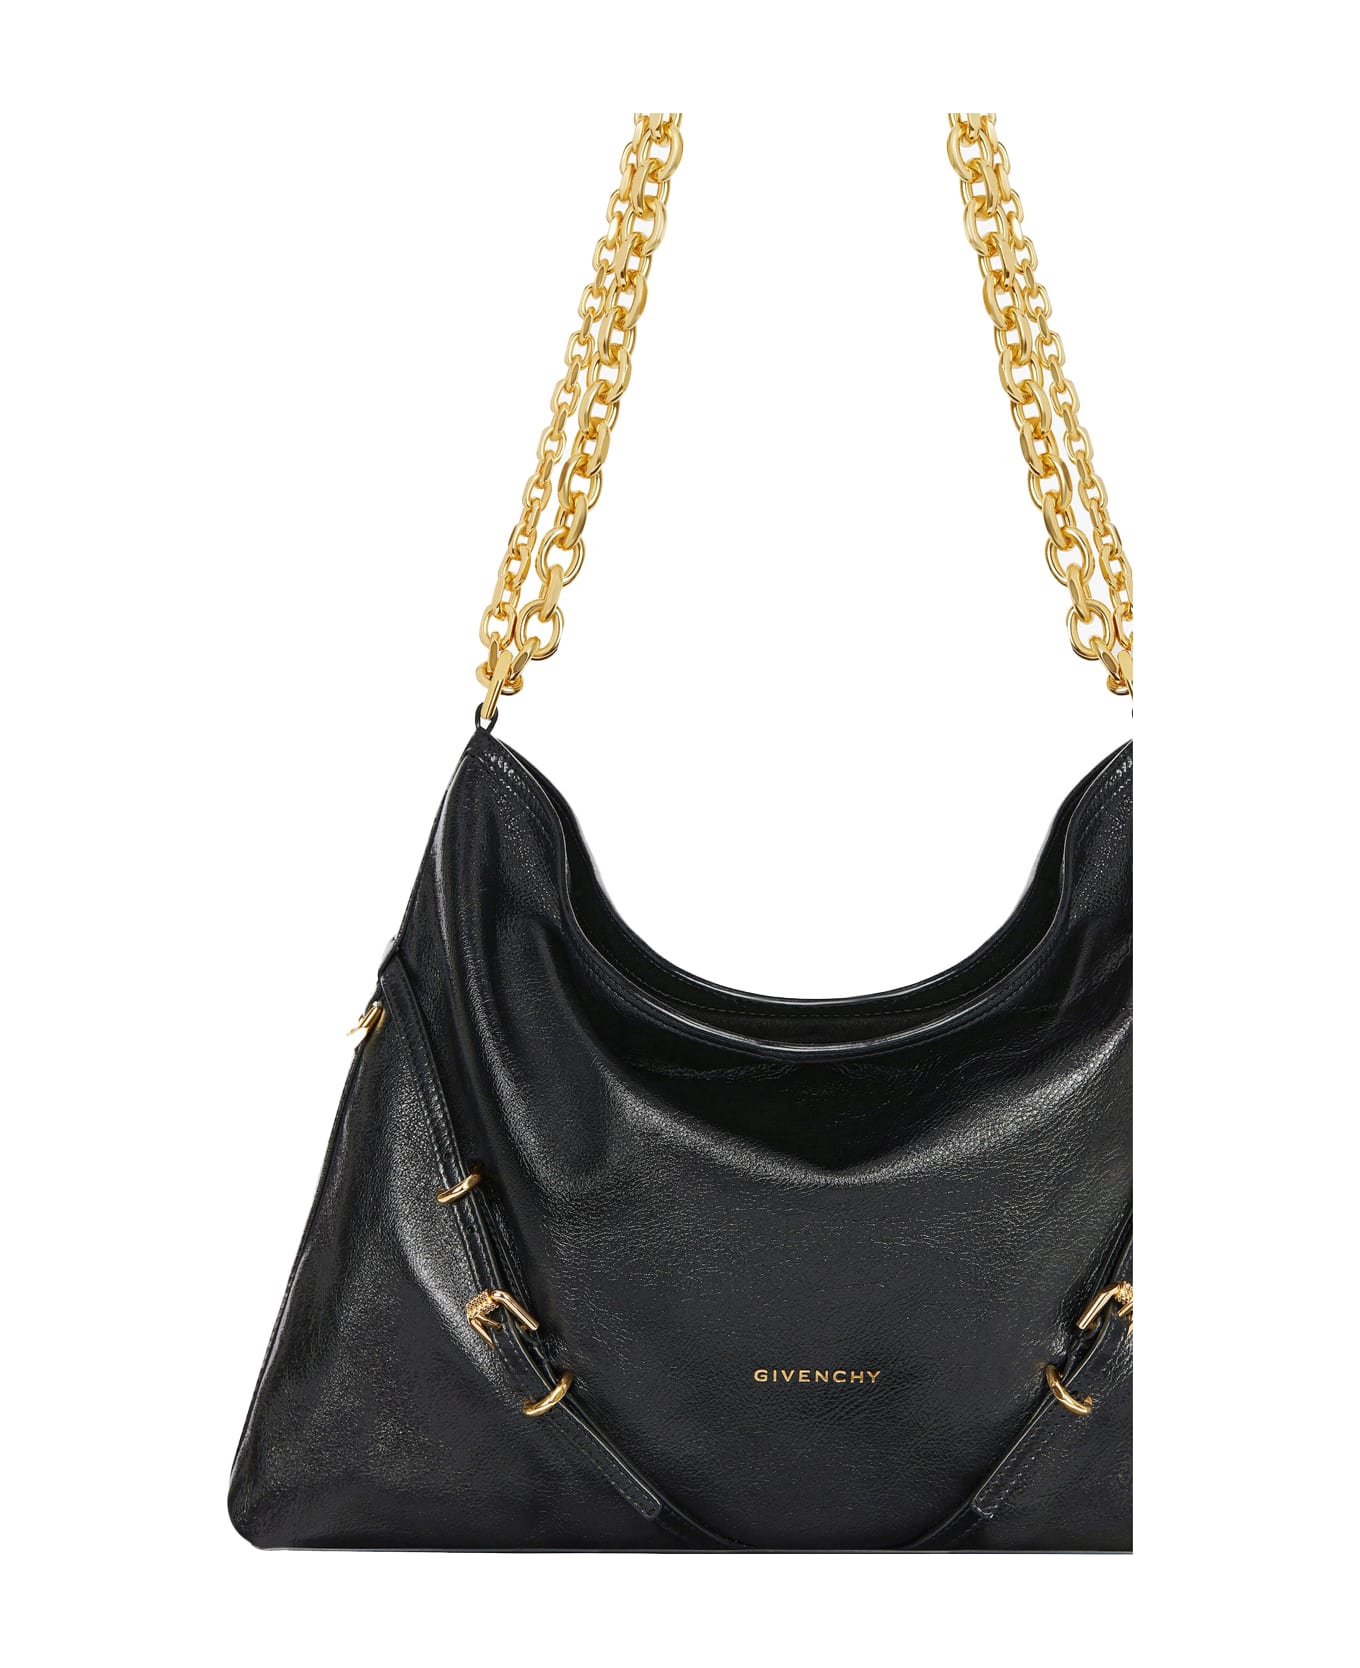 Givenchy Voyou Chain Medium Bag In Black Leather - Black